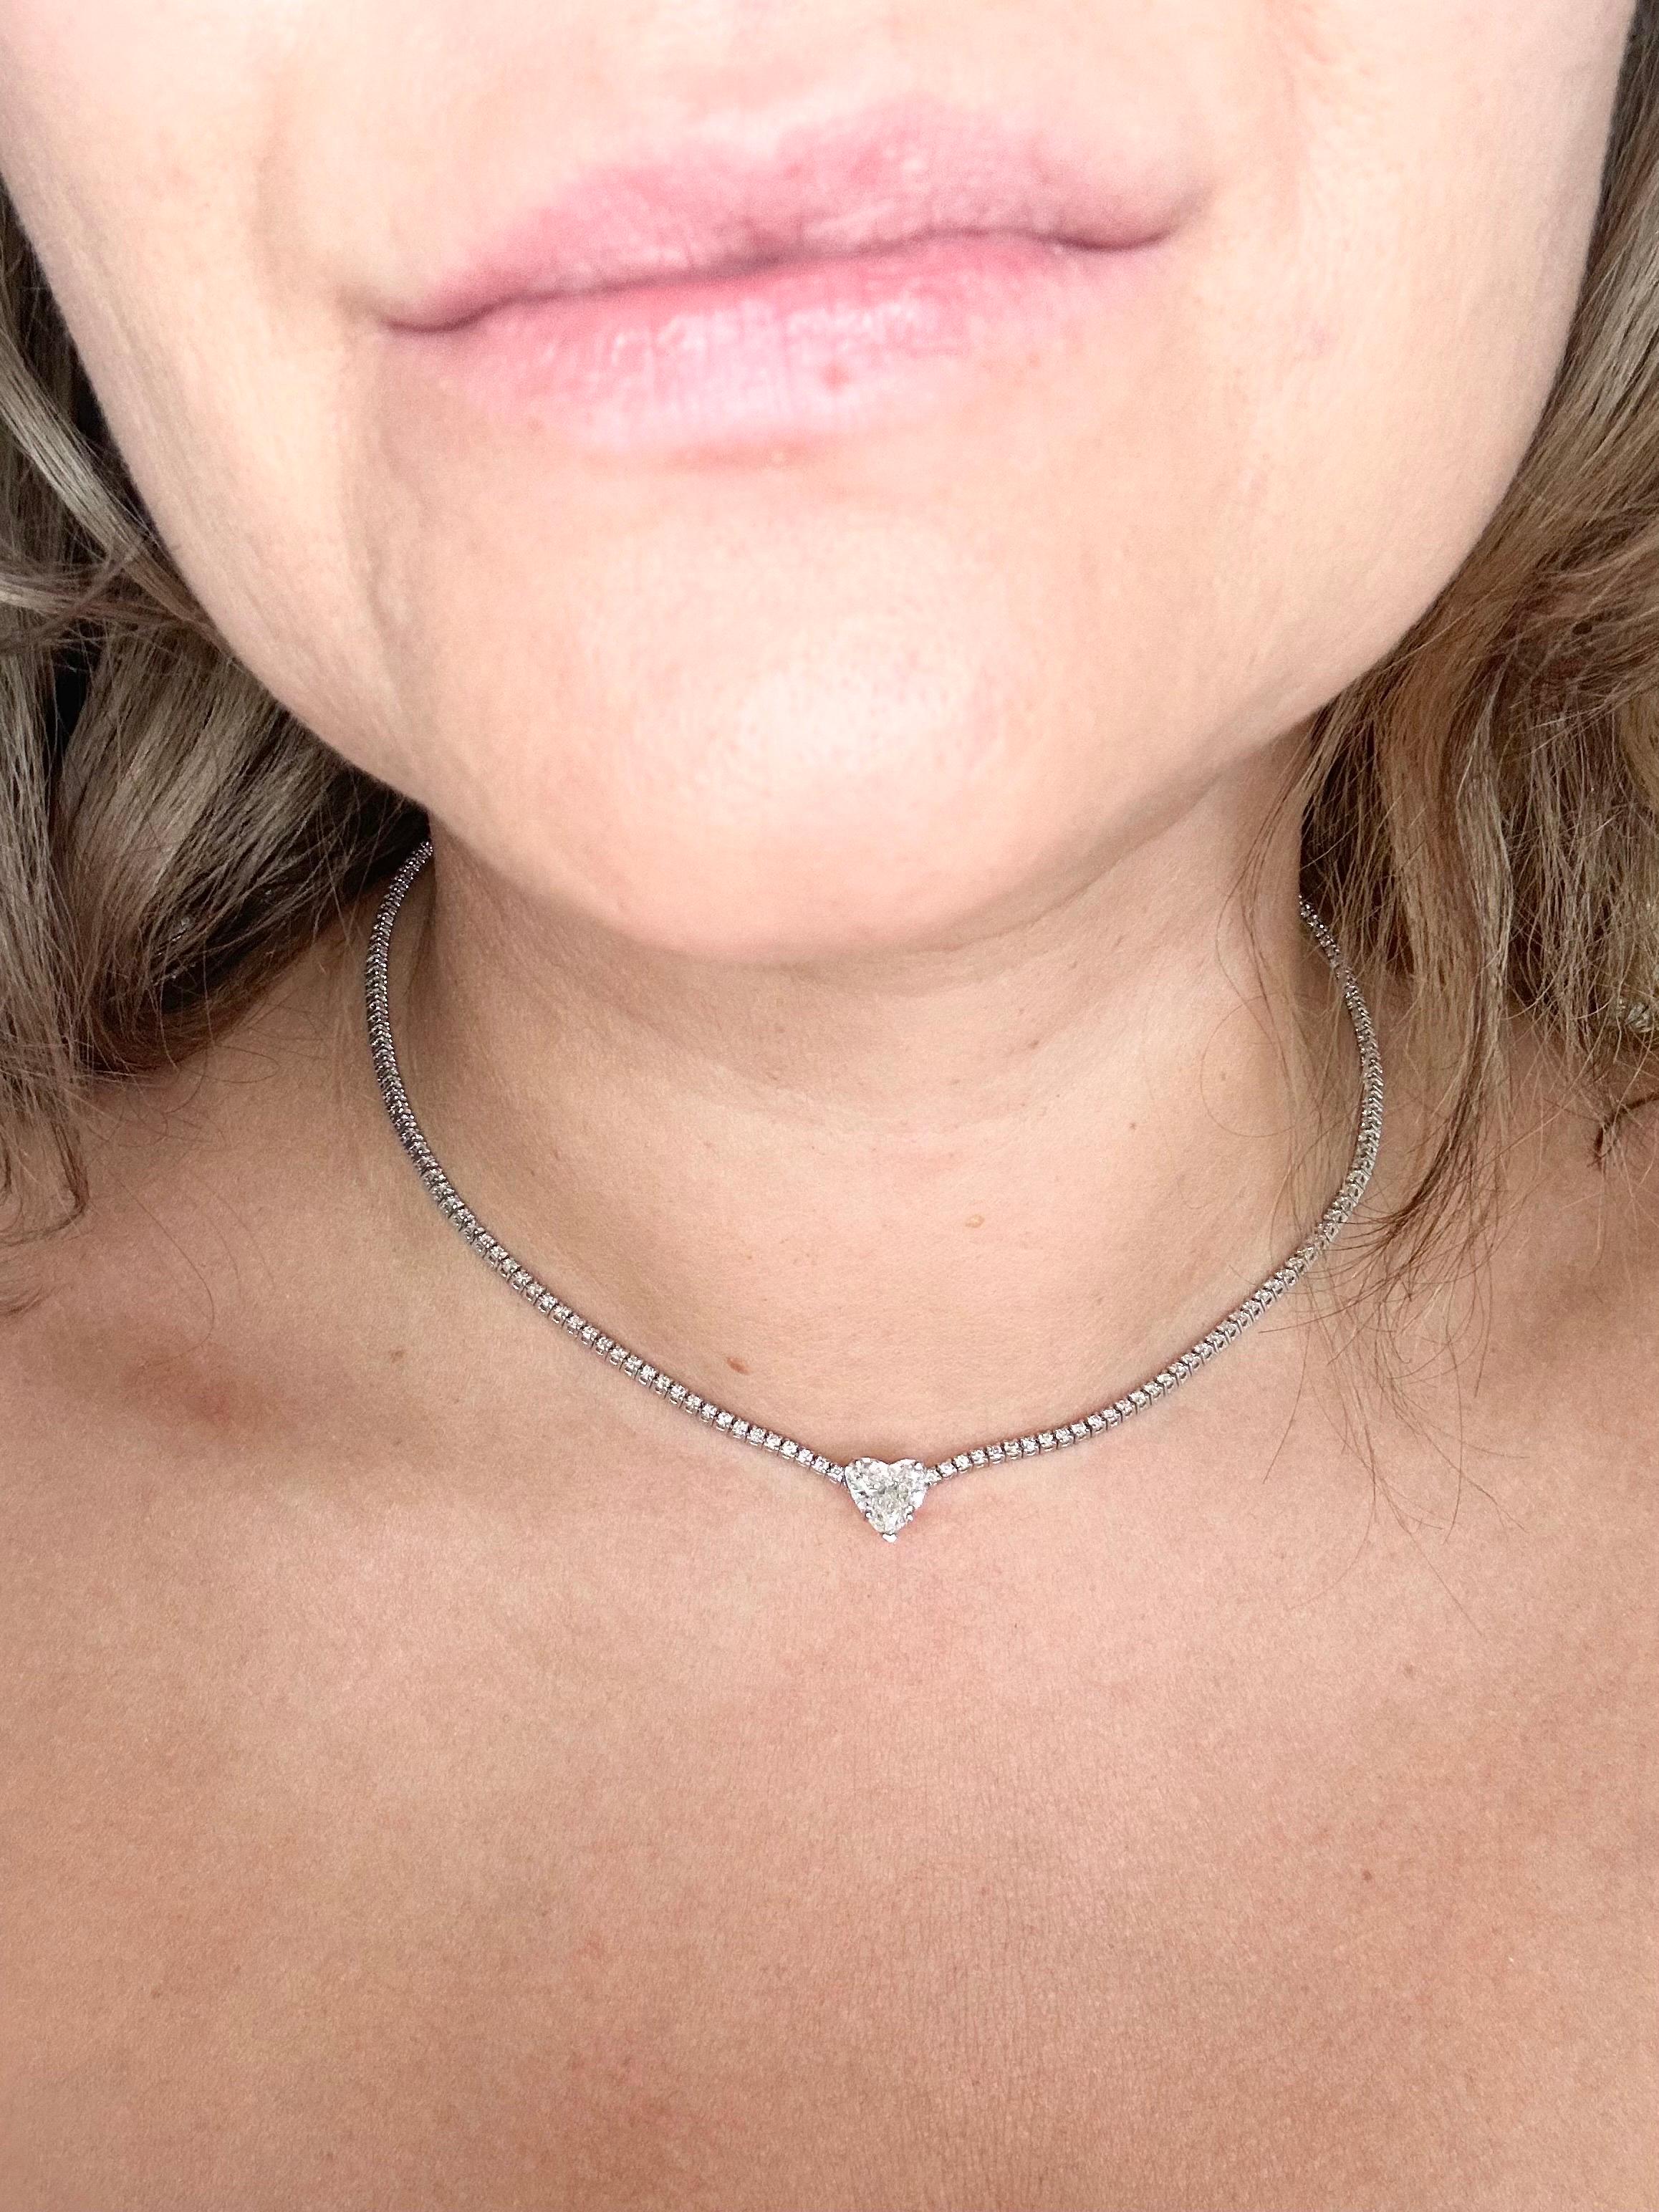 Heart Diamond tennis necklace 18KT white gold cocktail diamond necklace For Sale 2